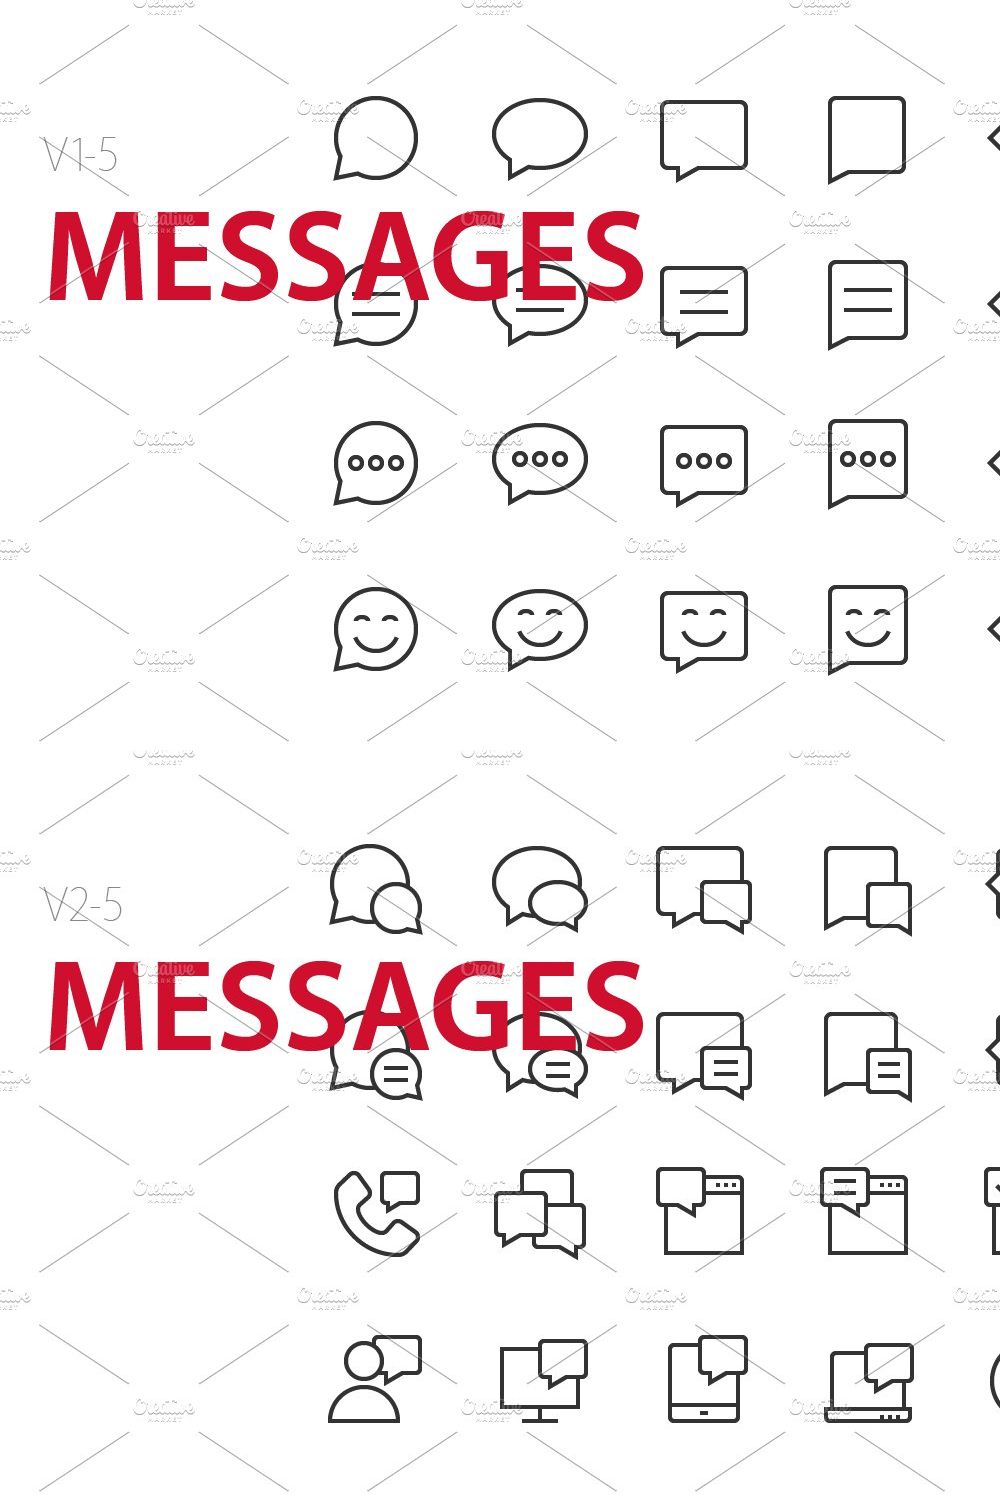 100 Messages UI icons pinterest preview image.